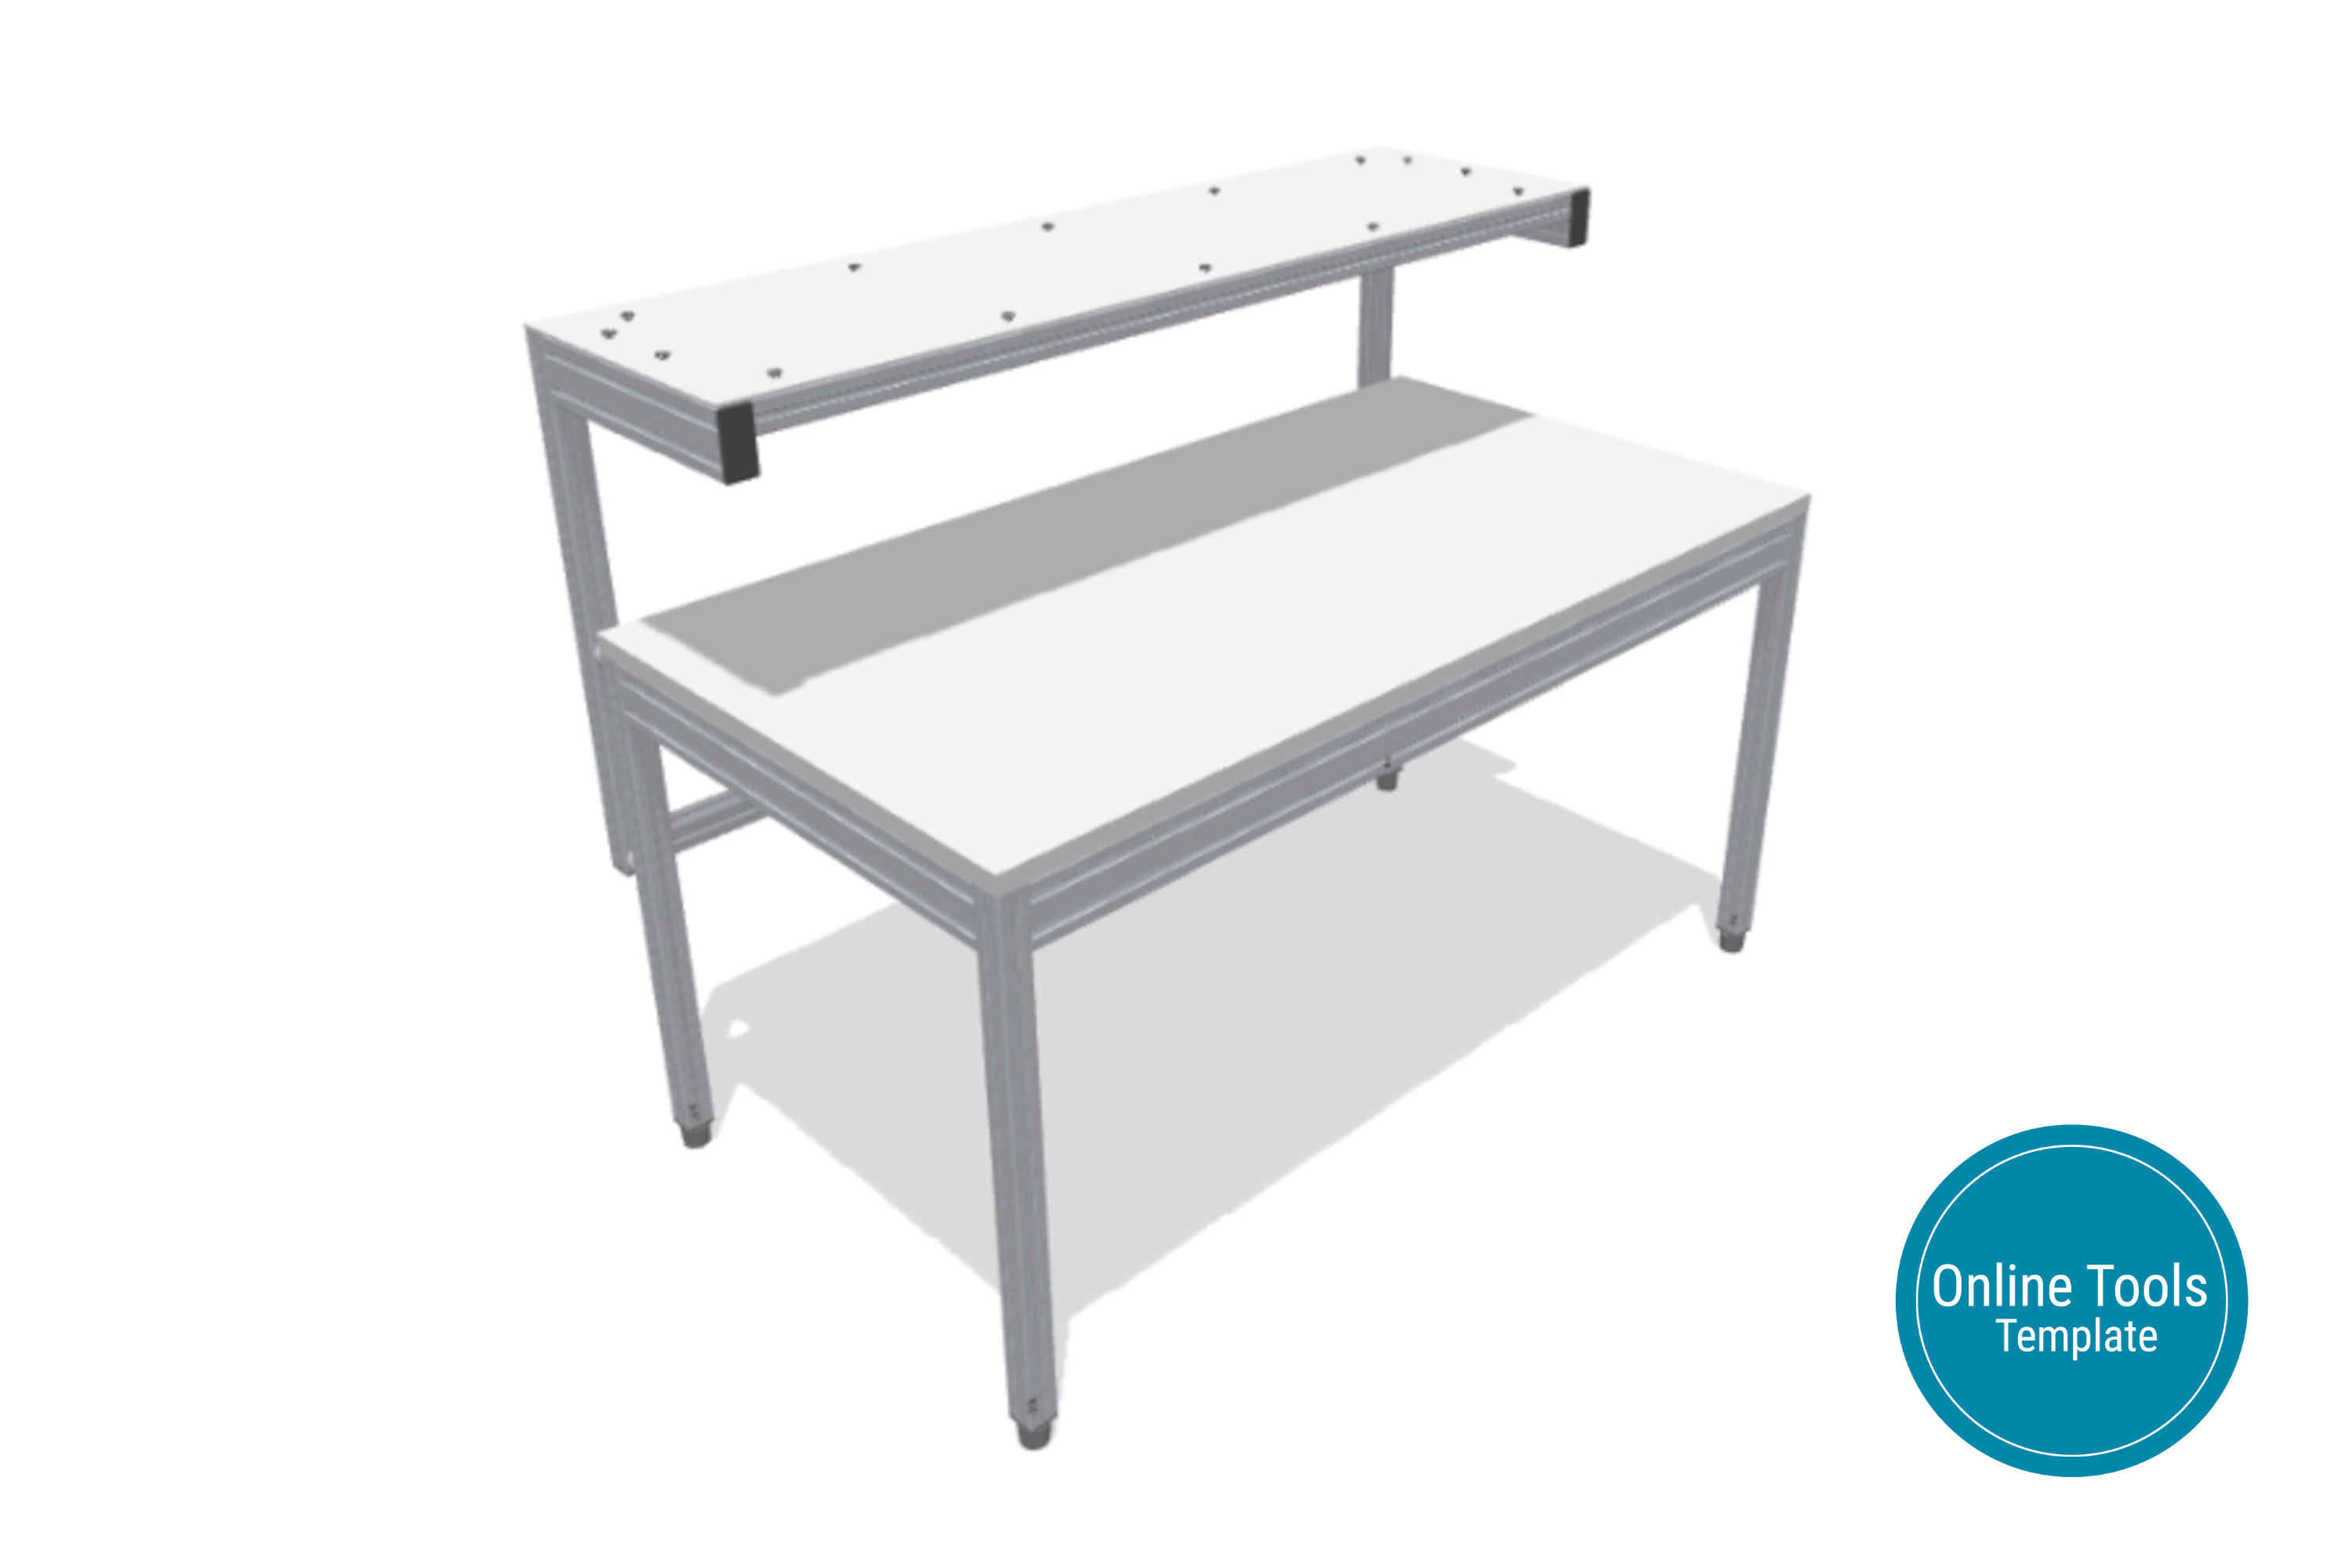 Lightweight MB work bench with simple, height-adjustable shelf